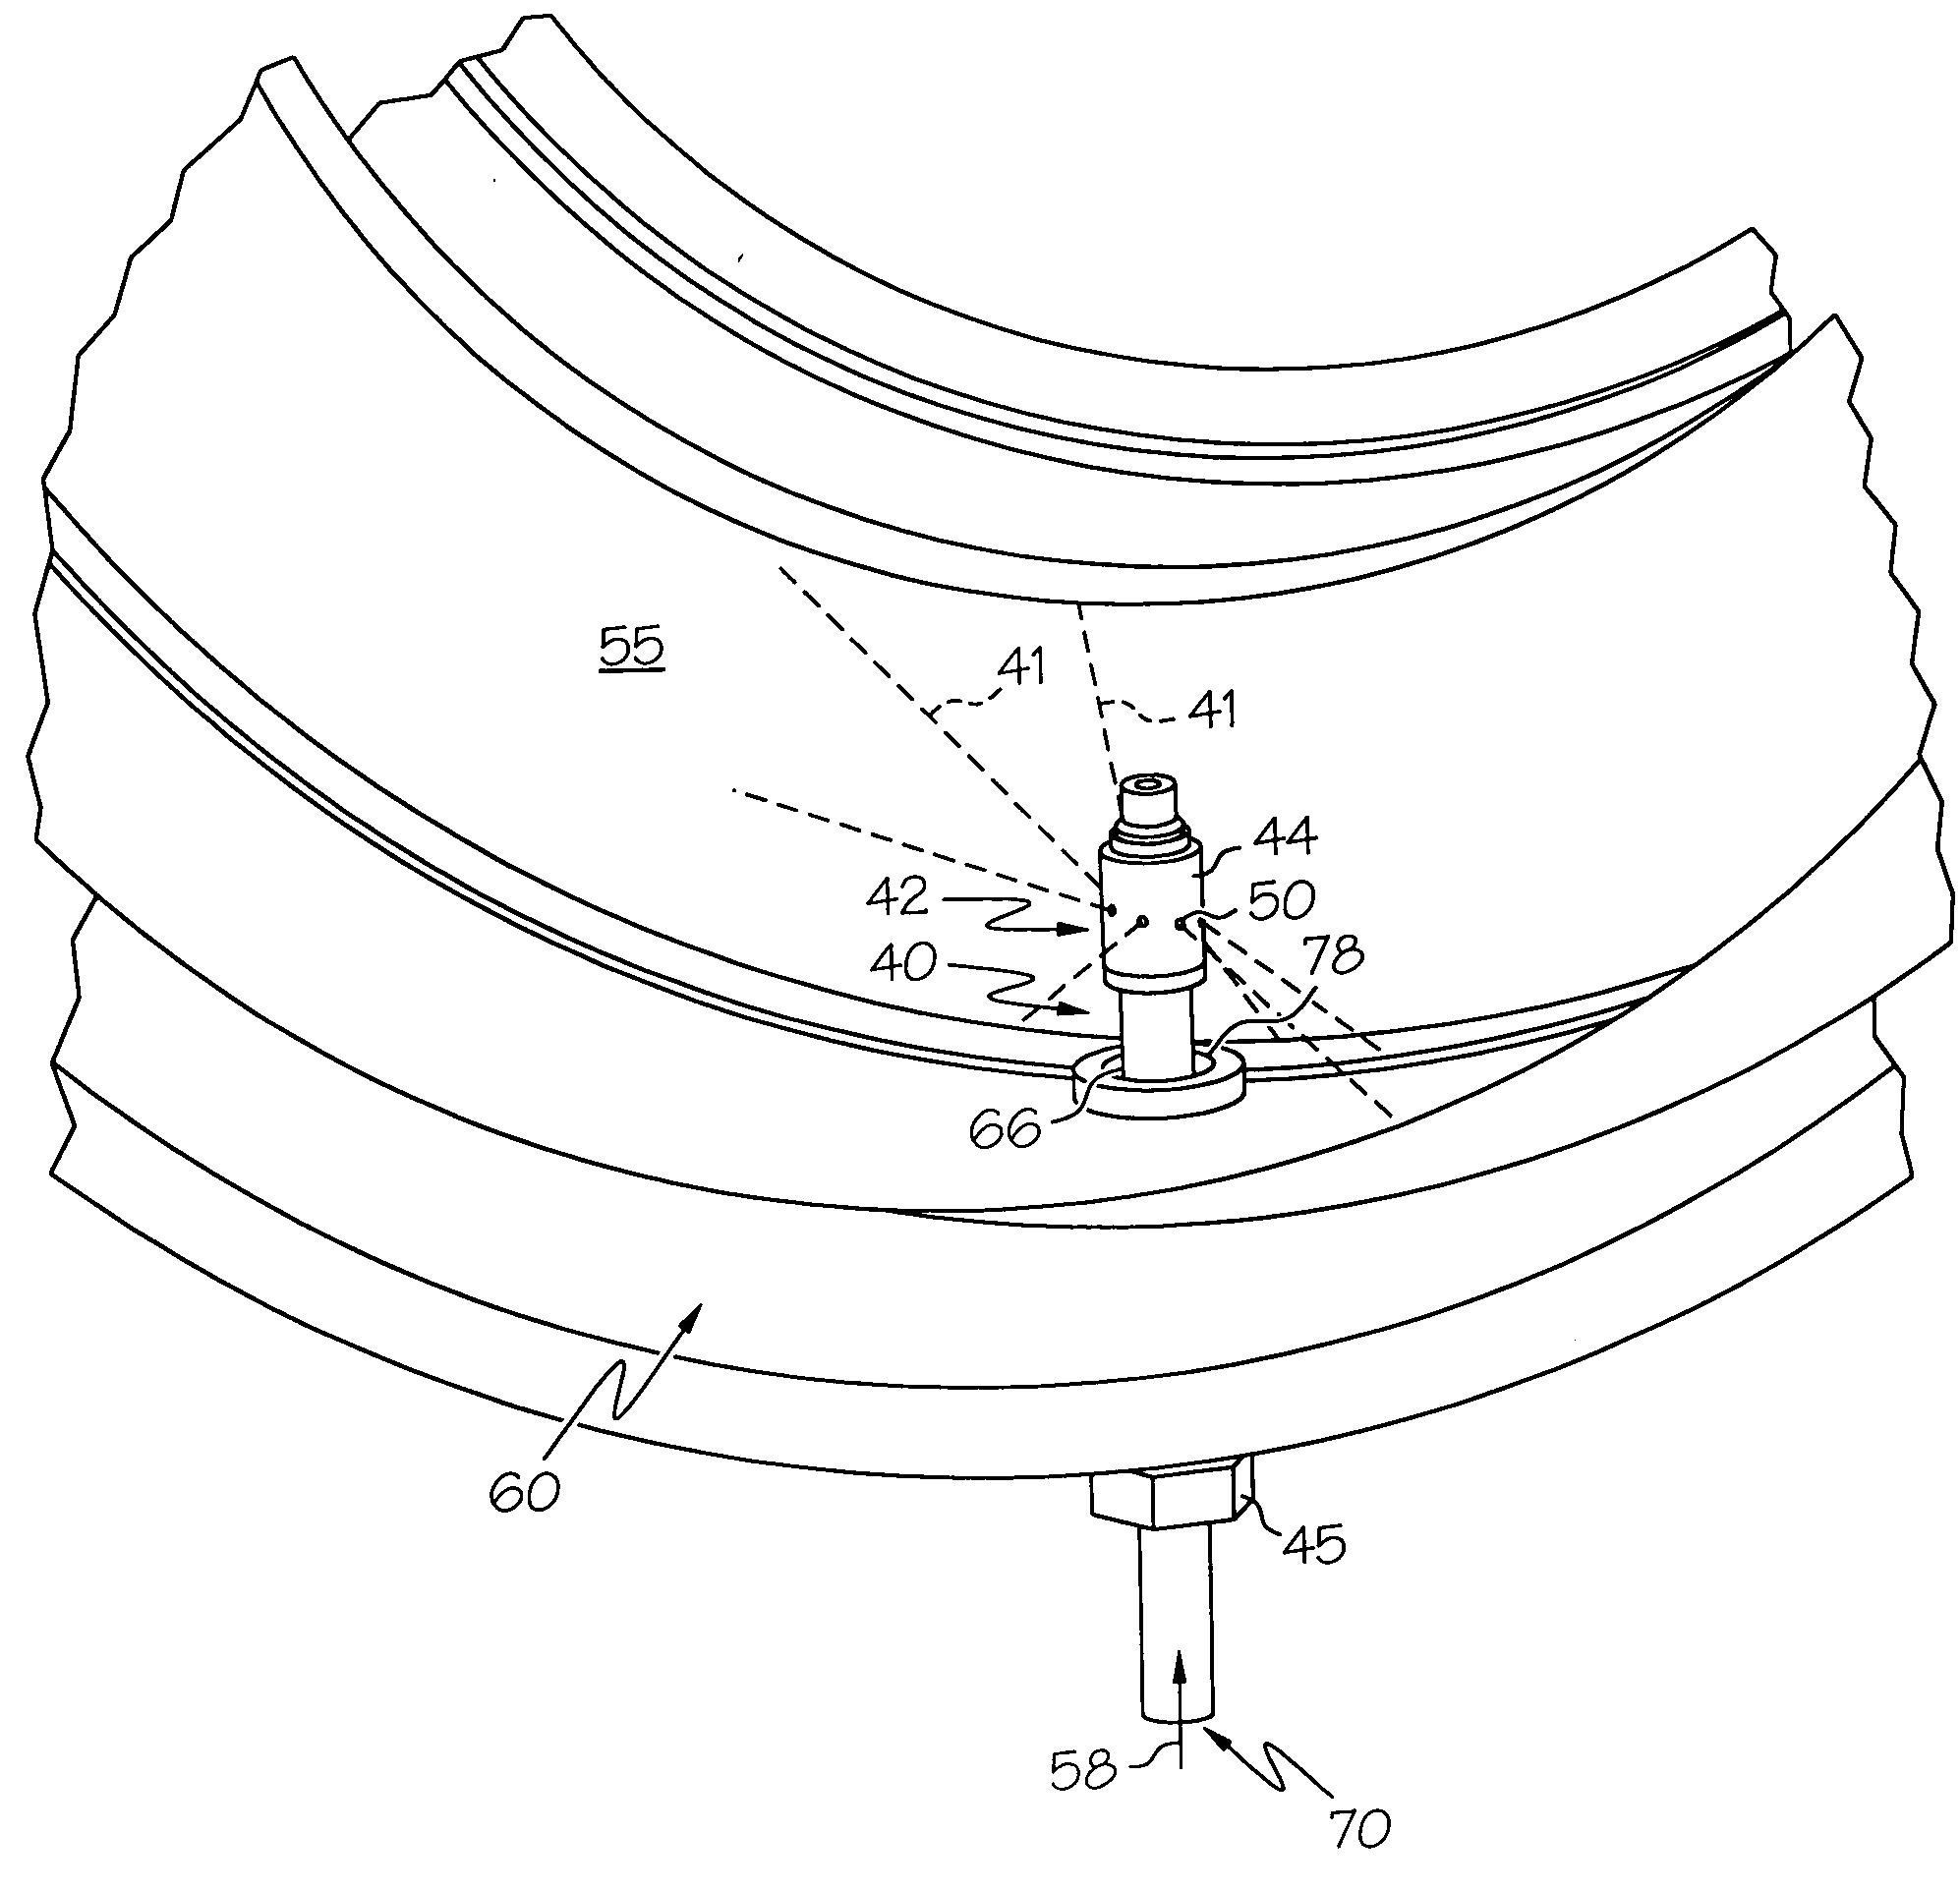 On-wing combustor cleaning using direct insertion nozzle, wash agent, and procedure